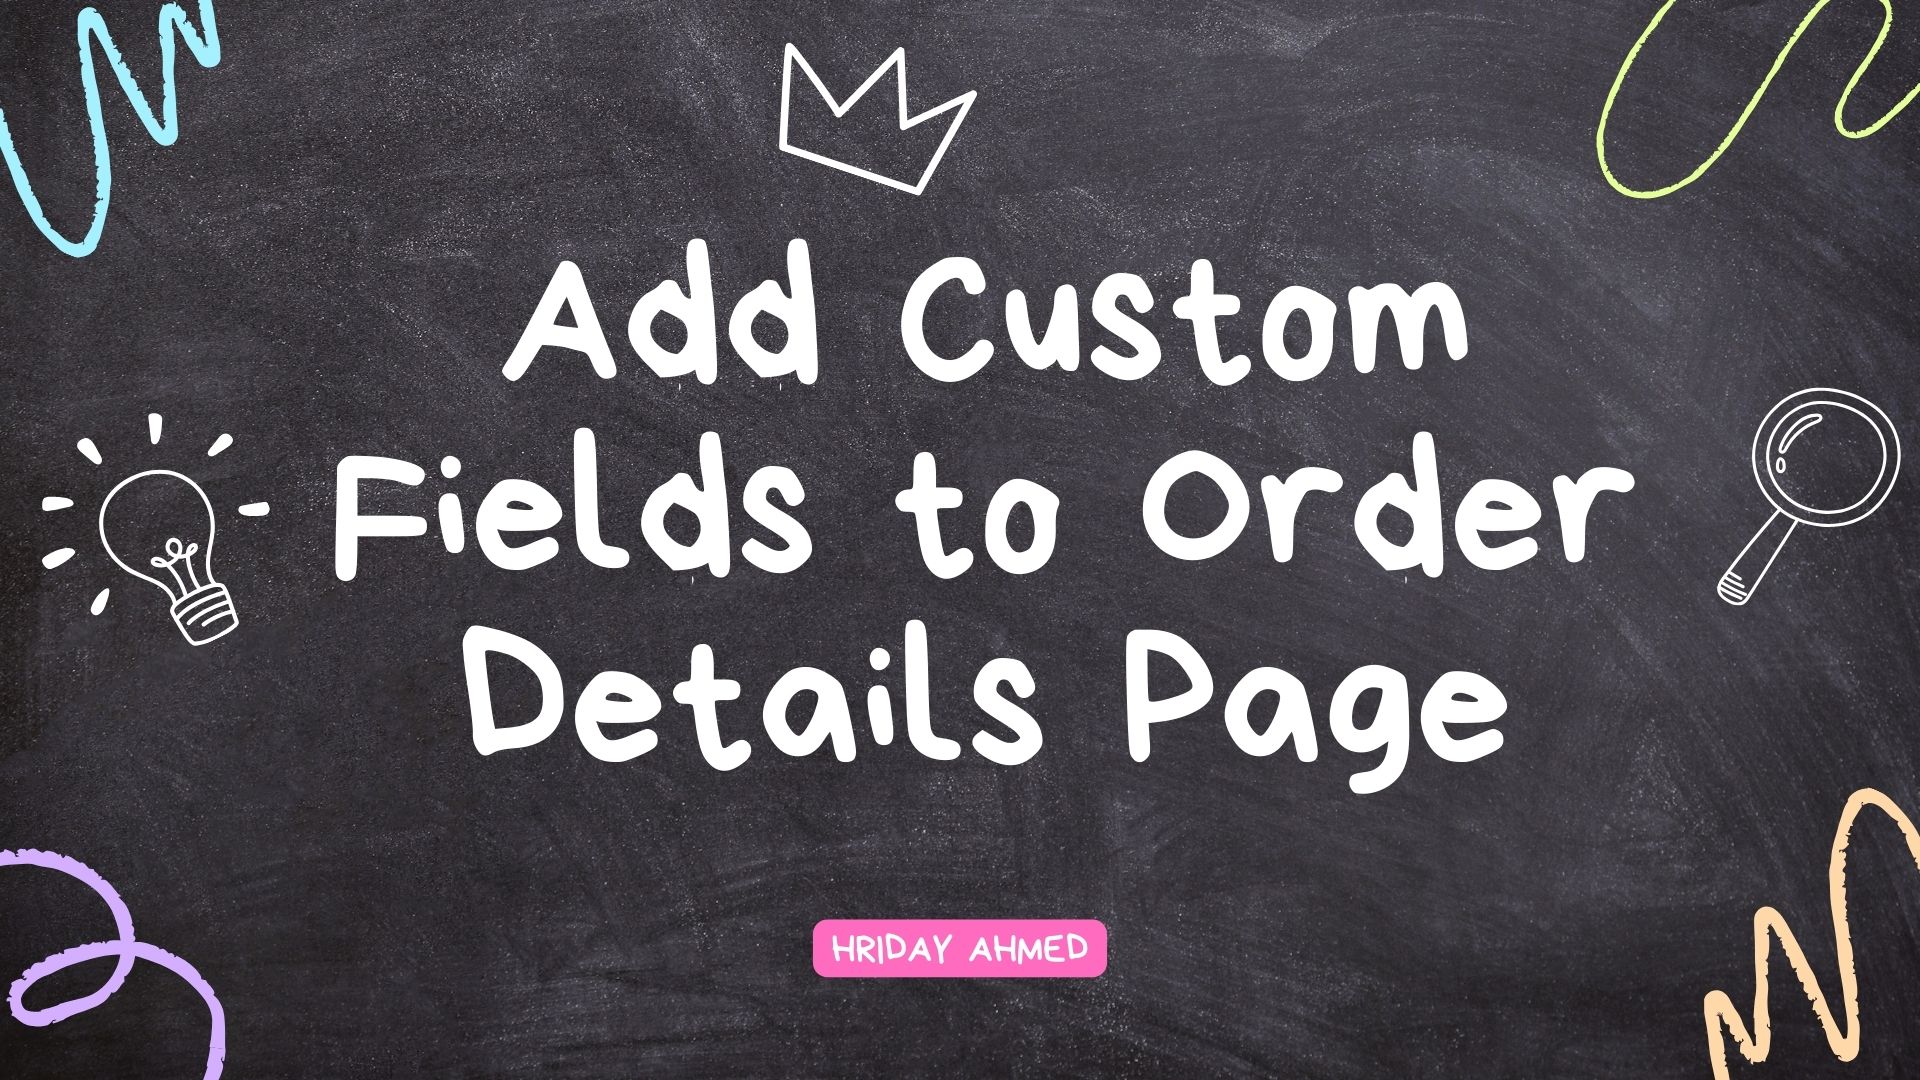 Add Custom Fields to Order Details Page